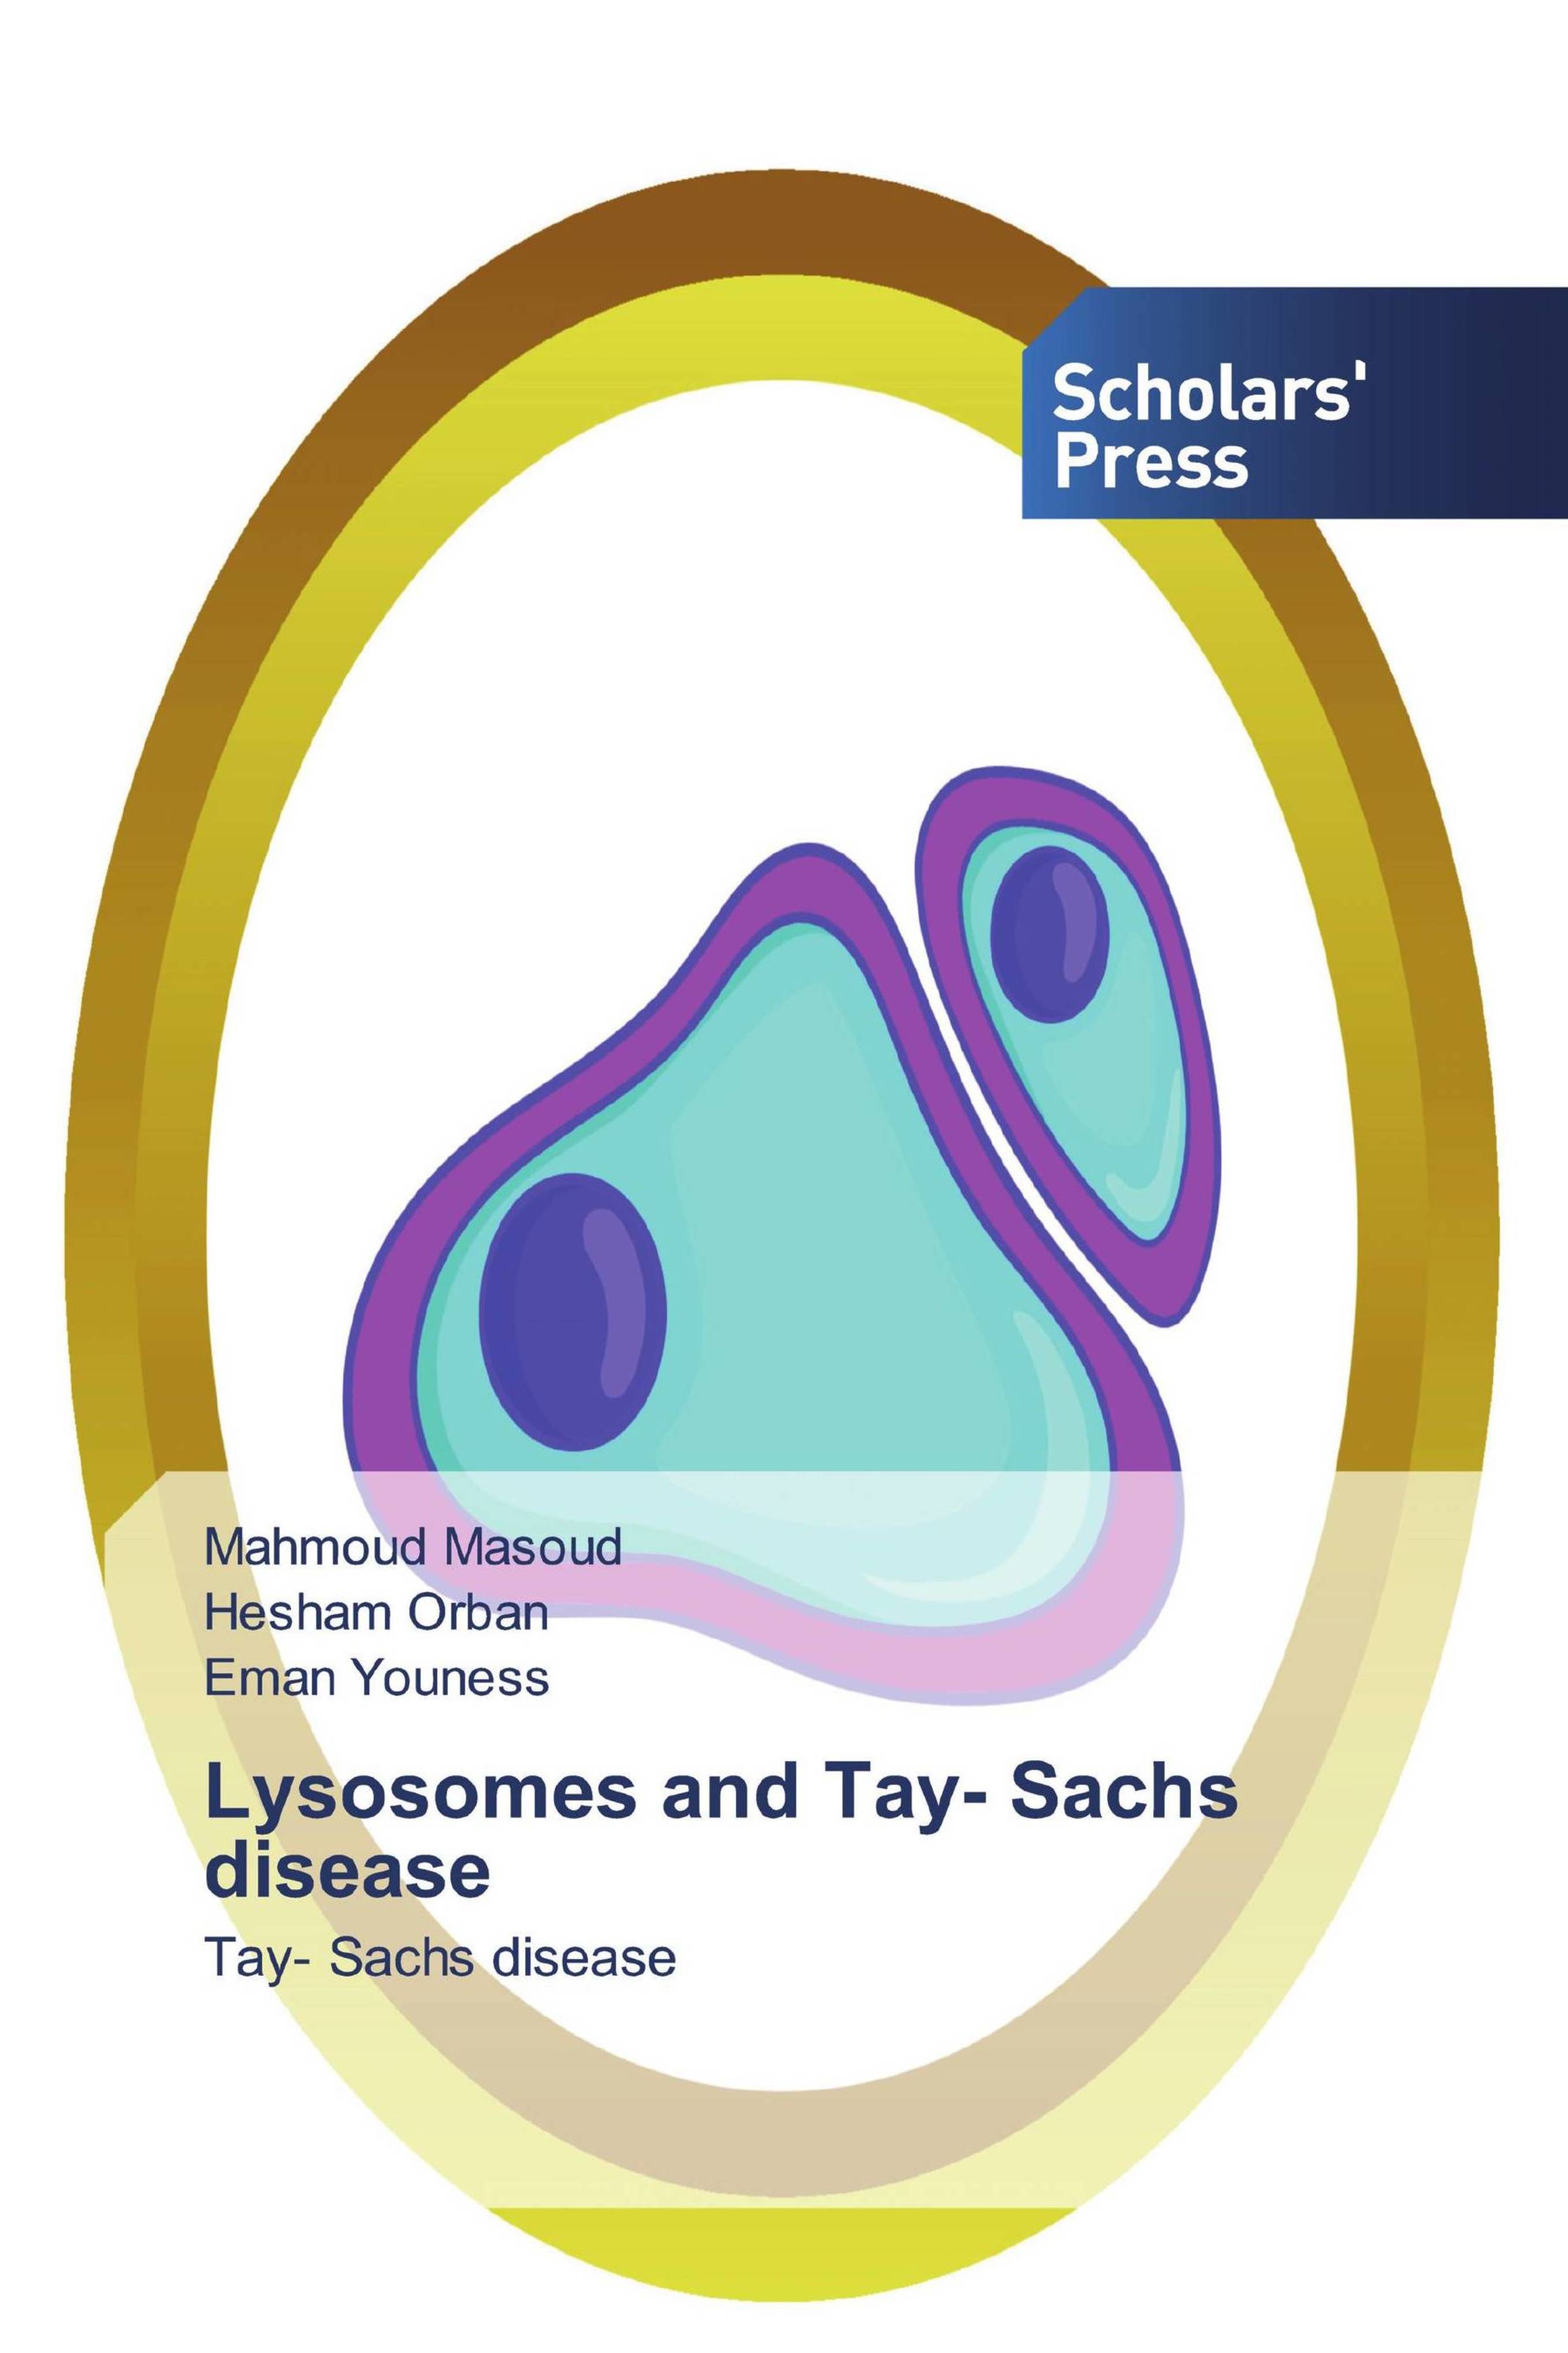 Tay-sachs Disease And Lysosomes - Captions Energy